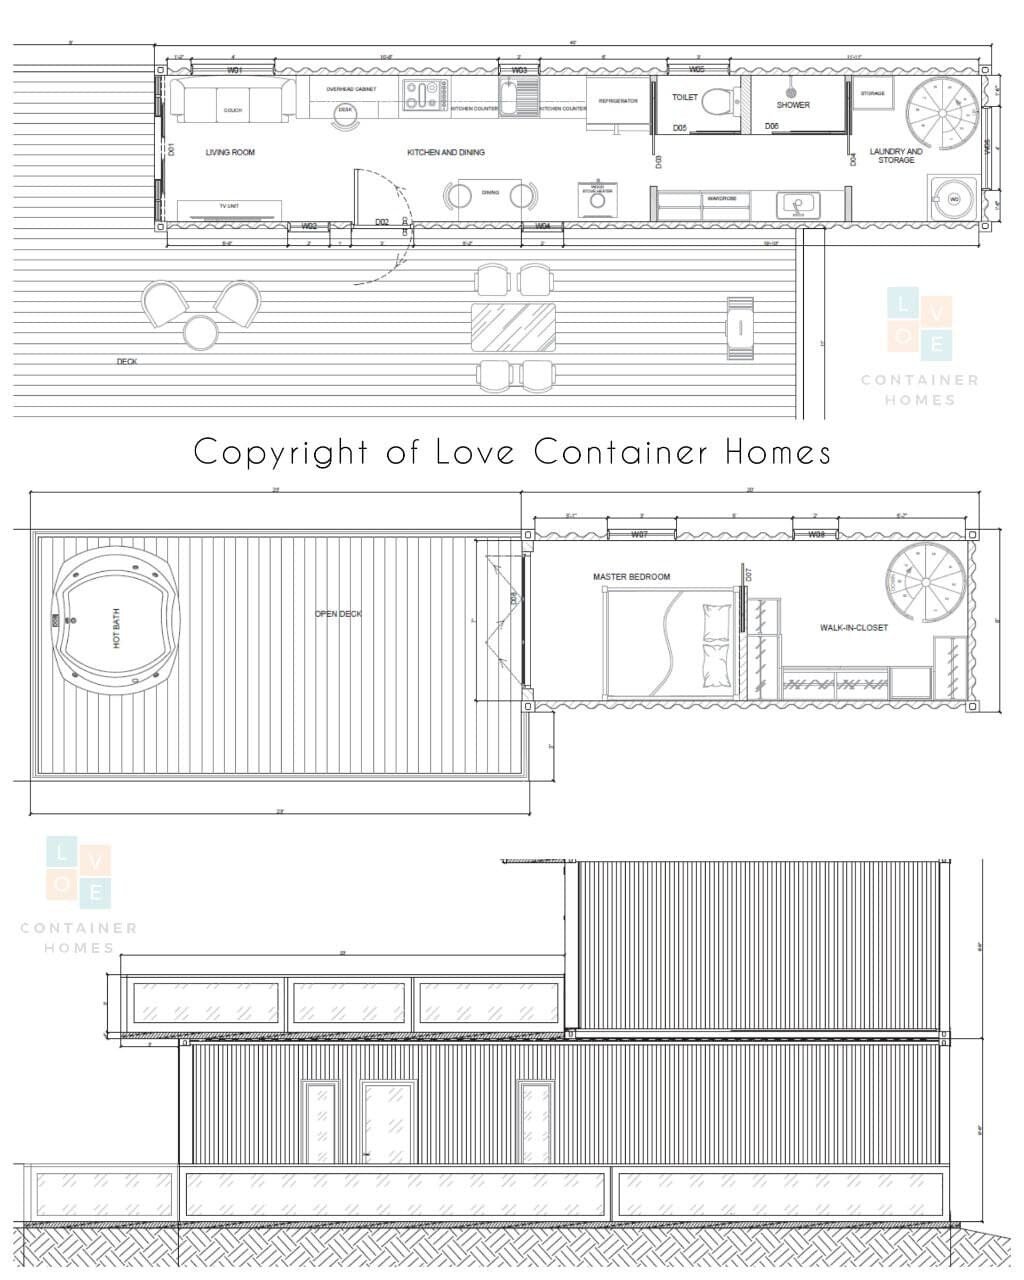 Shipping container home from love Container Homes